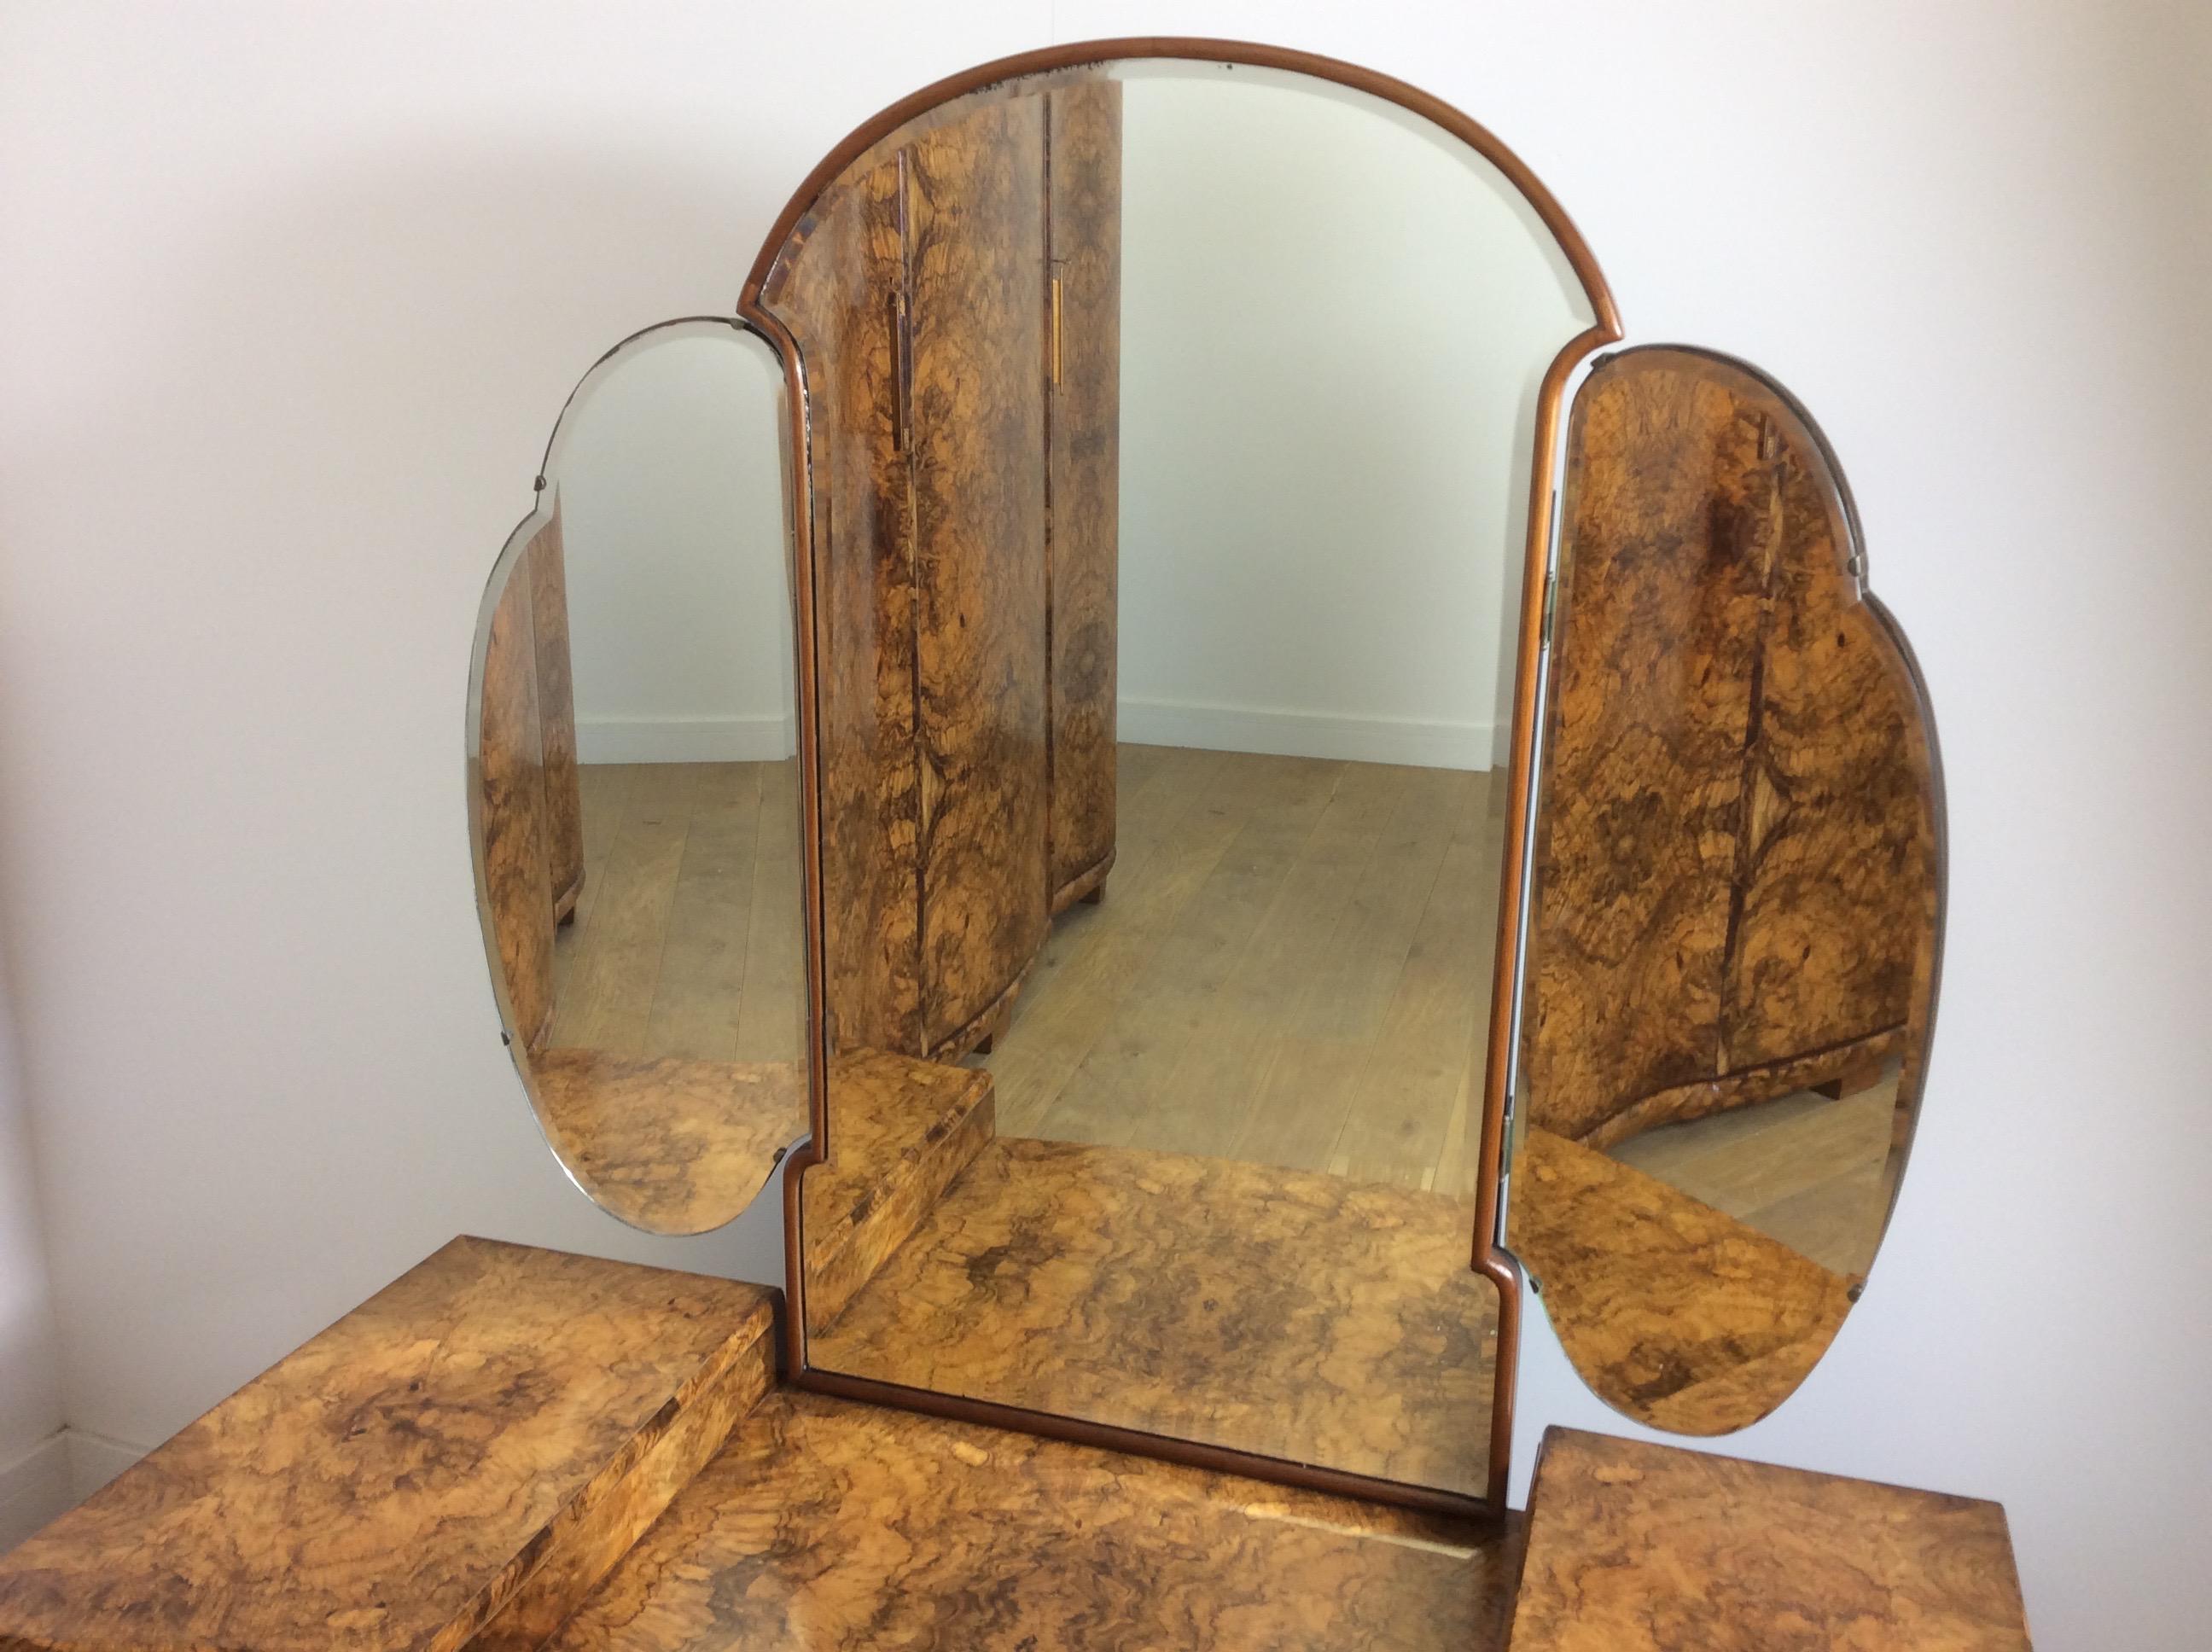 Art Deco serpentine dressing table.
Incredible Art Deco dressing table of serpentine design with the most stunning figured walnut and cloud shape mirror.
Great design with exceptional quality.
Measures: 157 cm H, 65 cm H, at the sides 121 cm W,